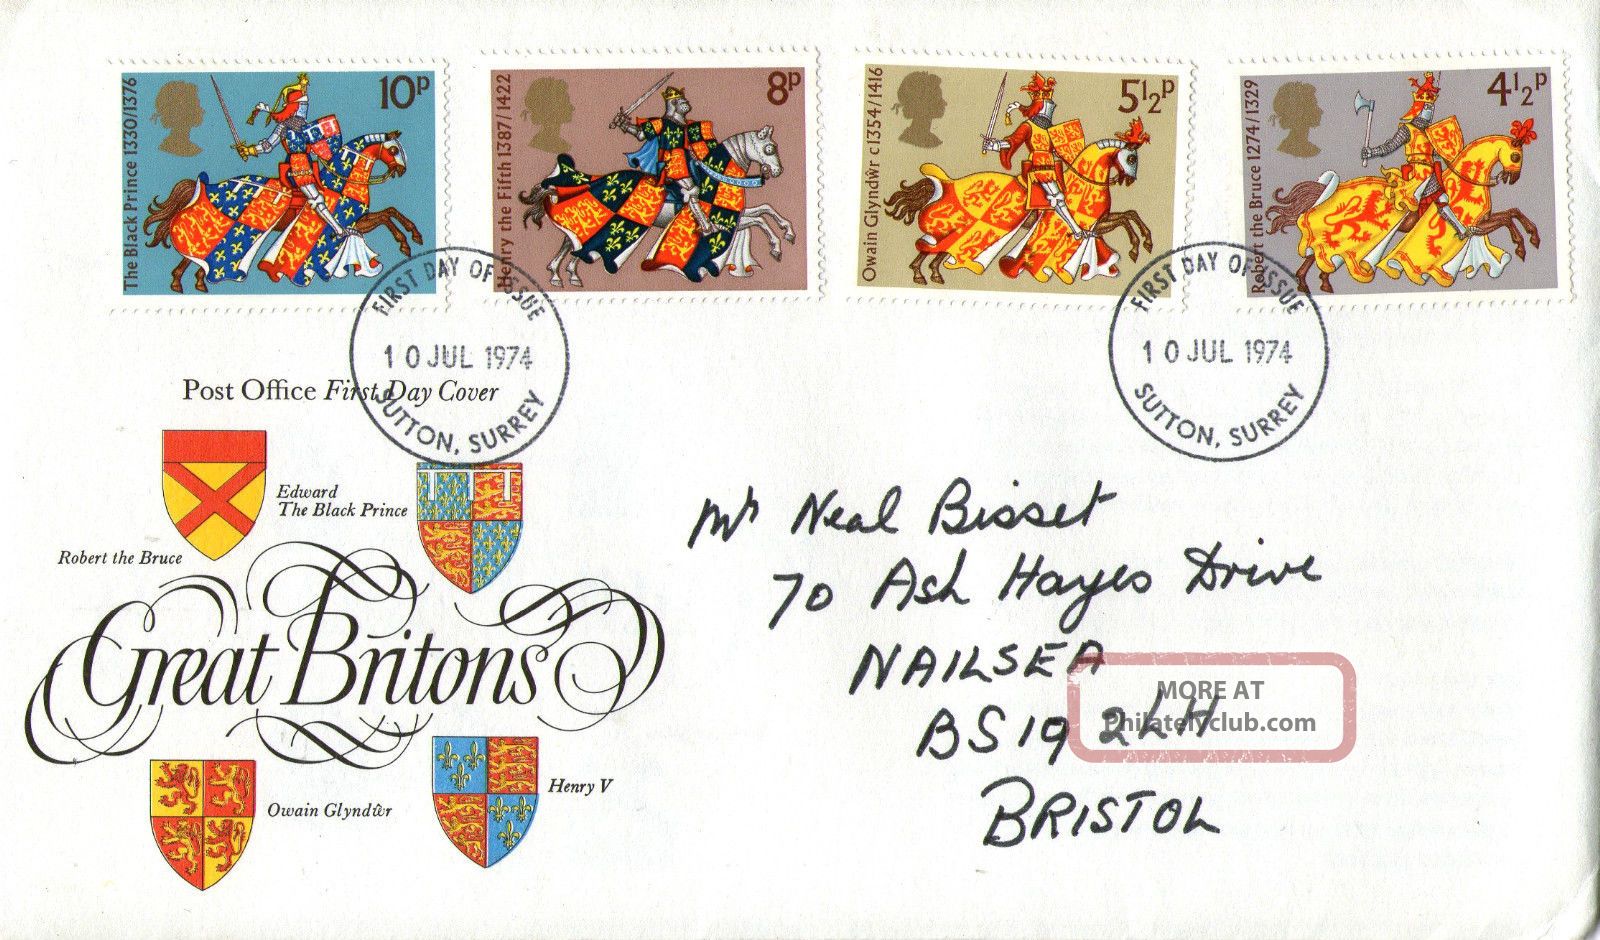 10 July 1974 Great Britons Post Office First Day Cover Sutton Surrey Fdi Topical Stamps photo